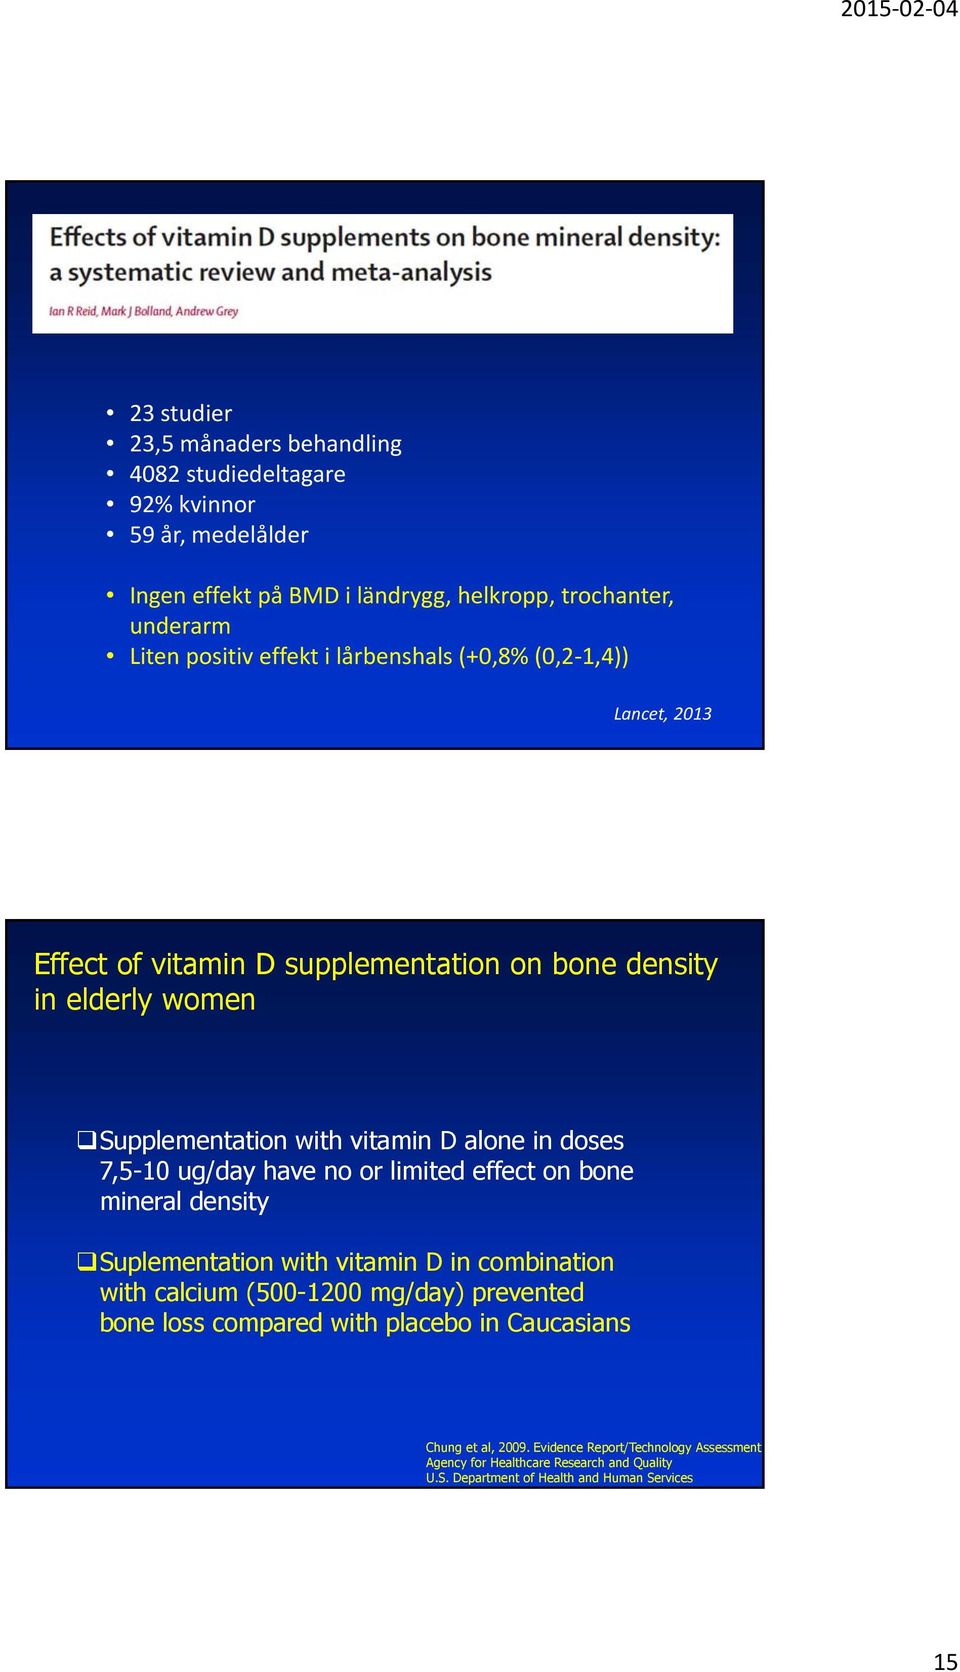 7,5-10 ug/day have no or limited effect on bone mineral density Suplementation with vitamin D in combination with calcium (500-1200 mg/day) prevented bone loss compared